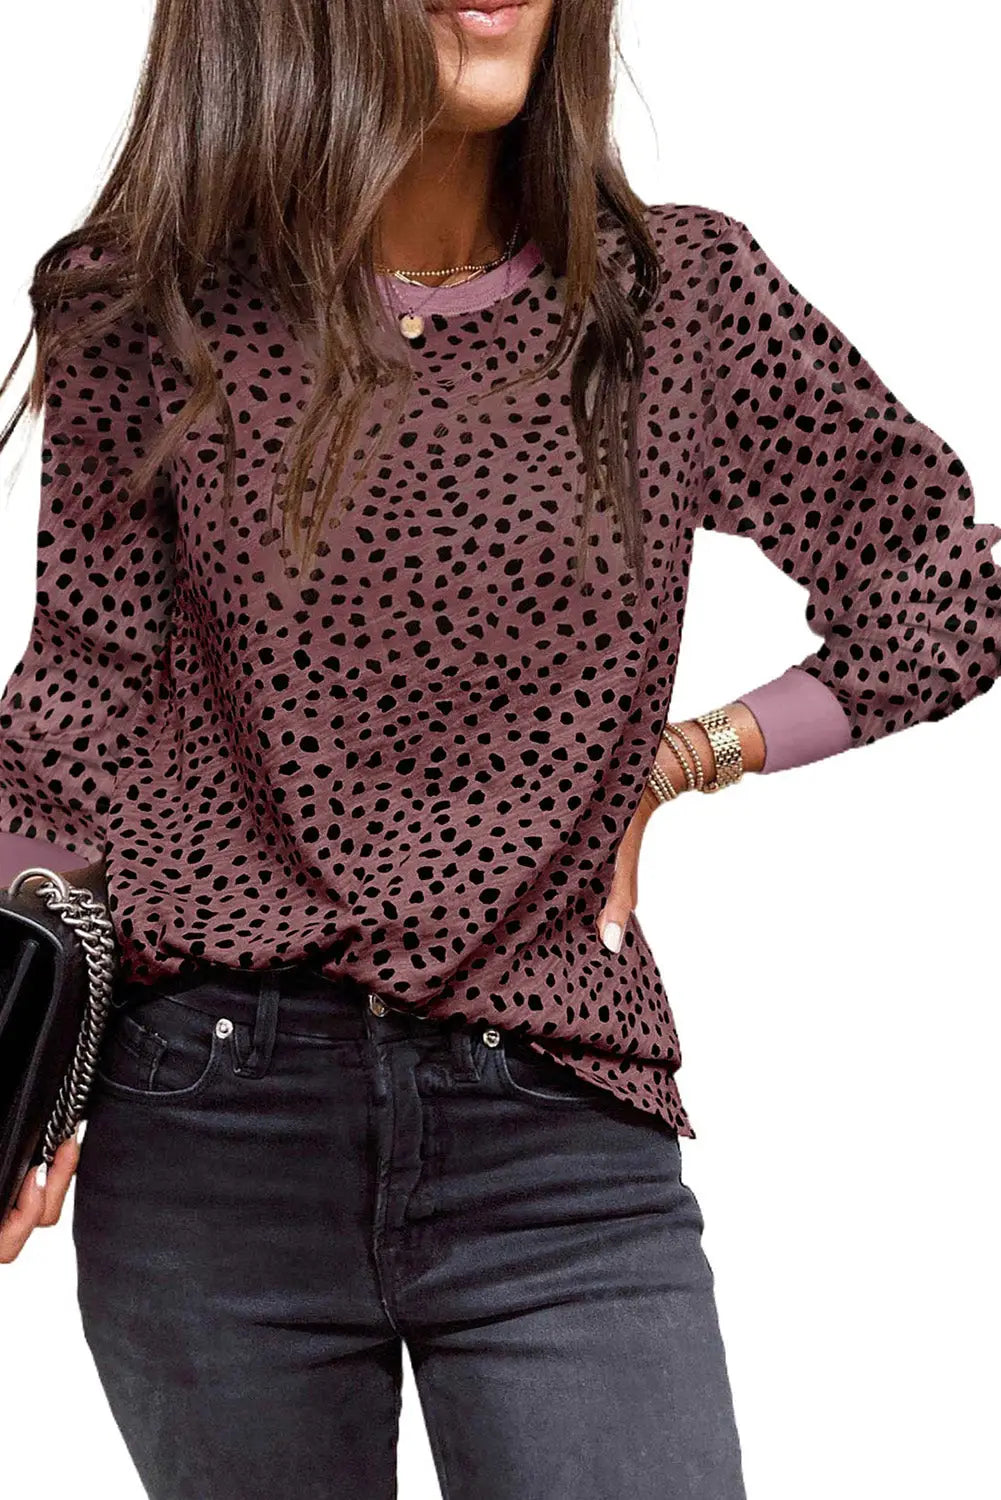 Animal Spotted Print Round Neck Long Sleeve Top-10